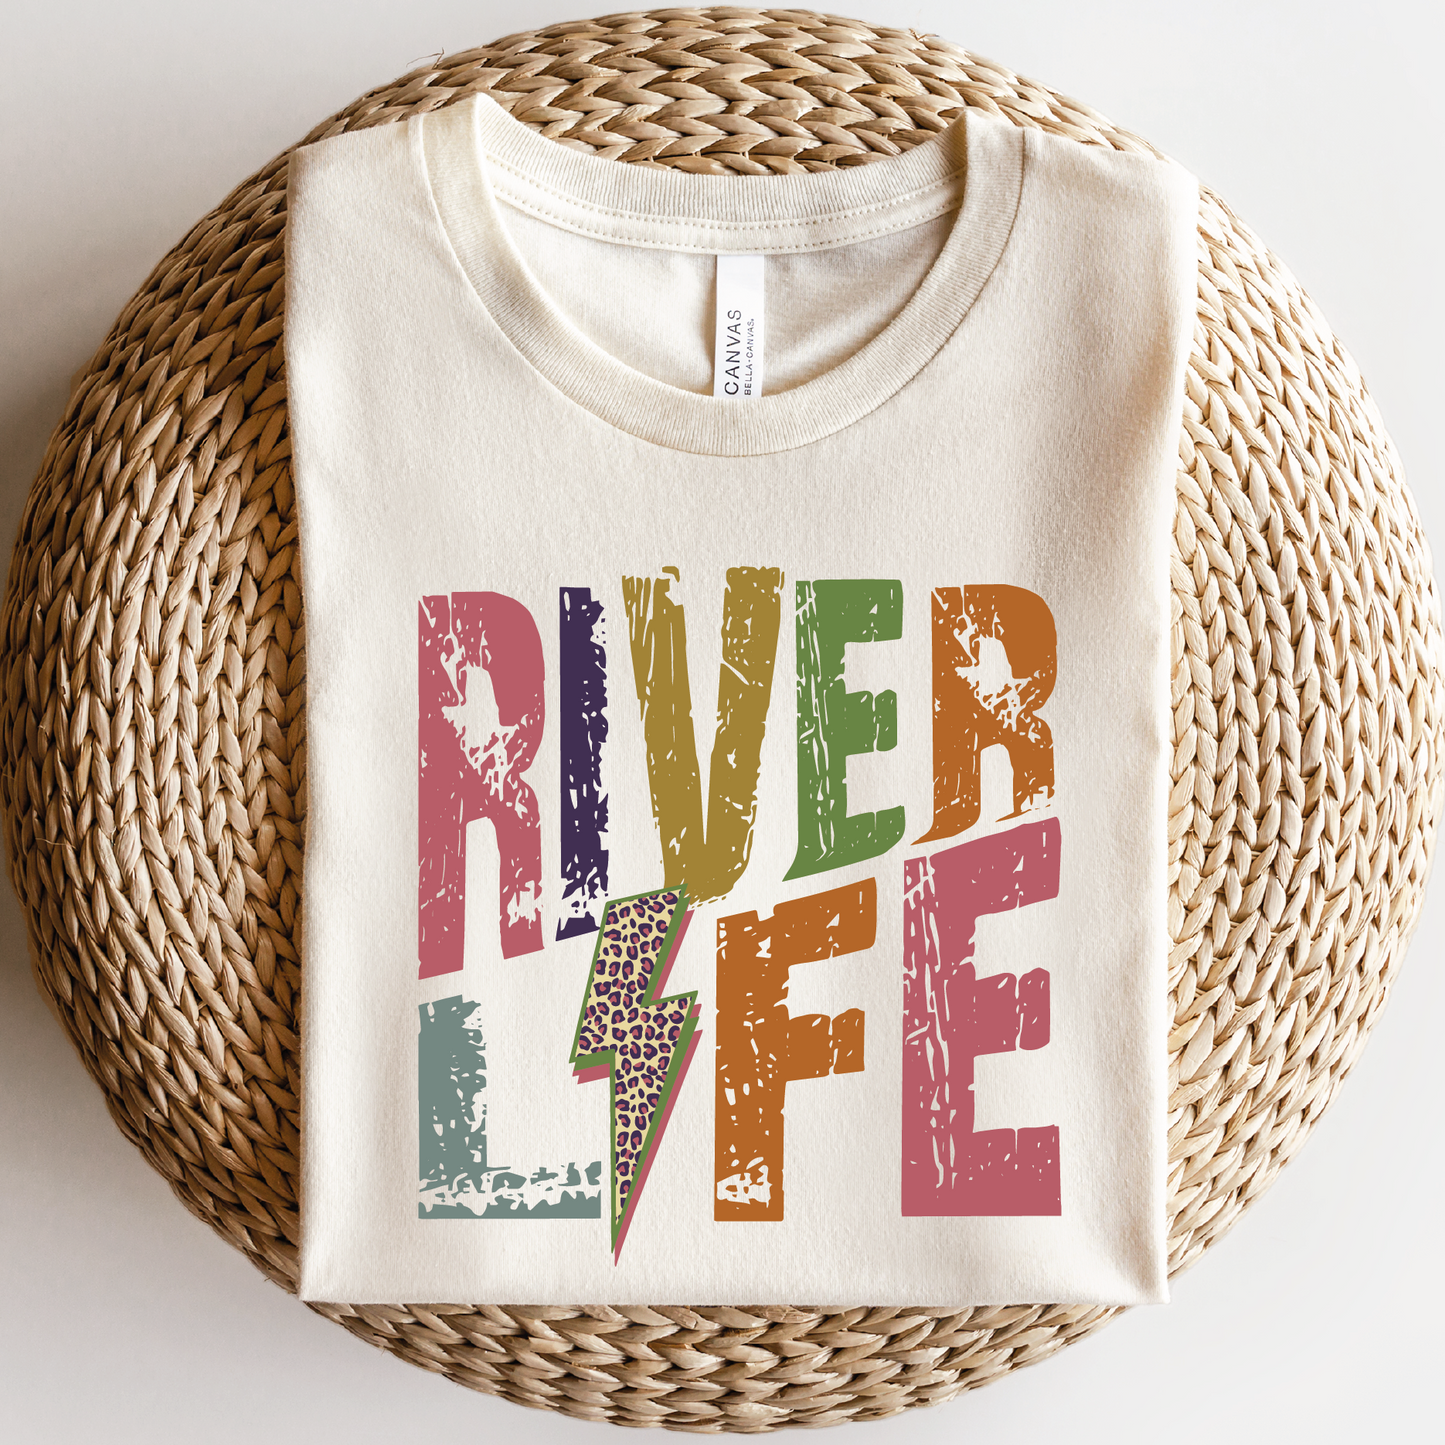 a white shirt that says river life on it